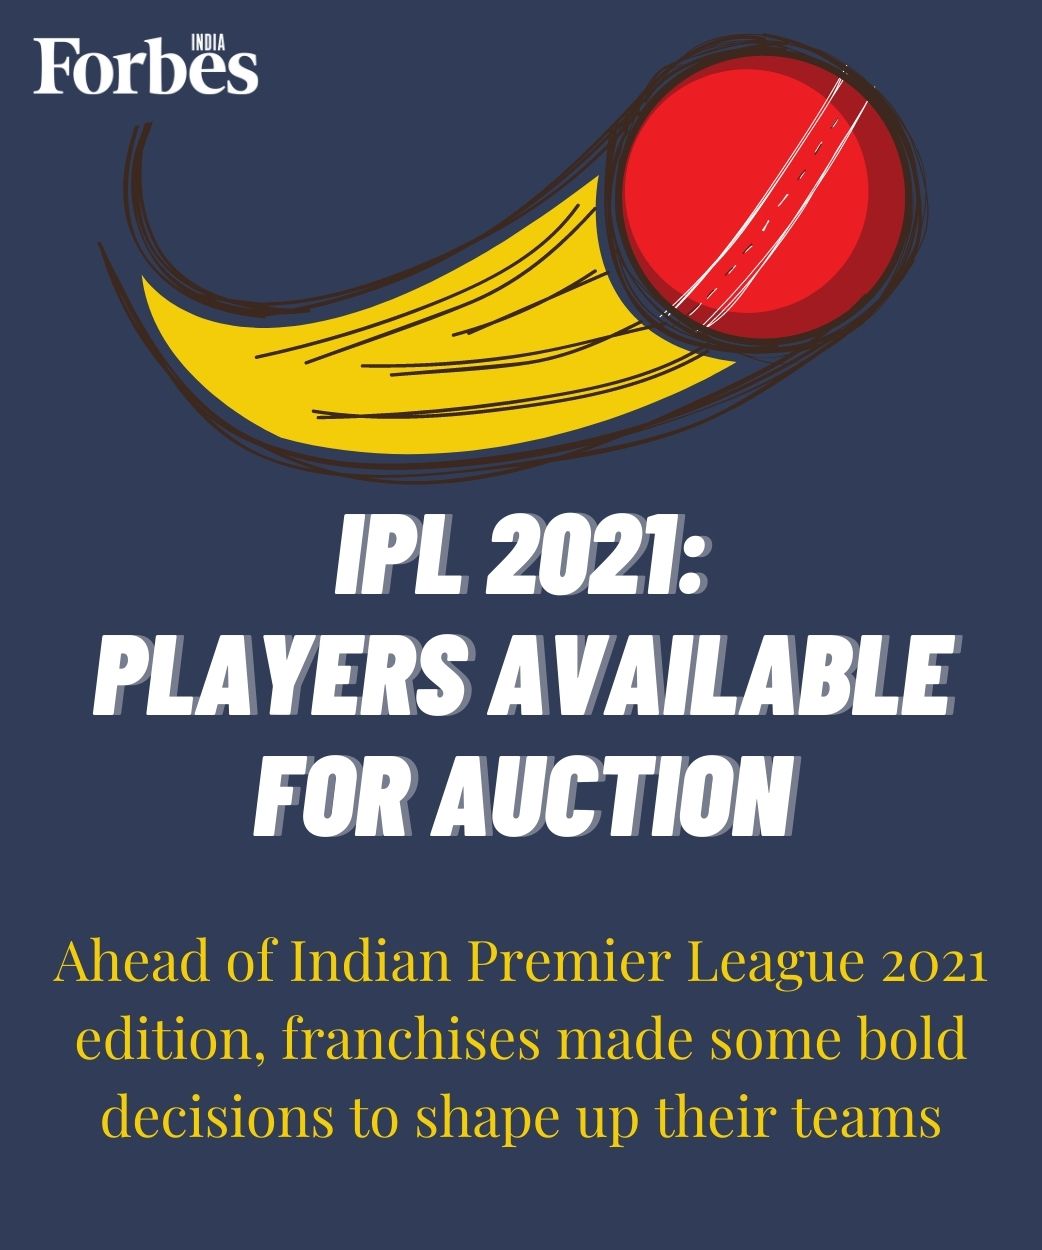 IPL 2021: From Steve Smith to Harbhajan Singh, players released ahead of auctions